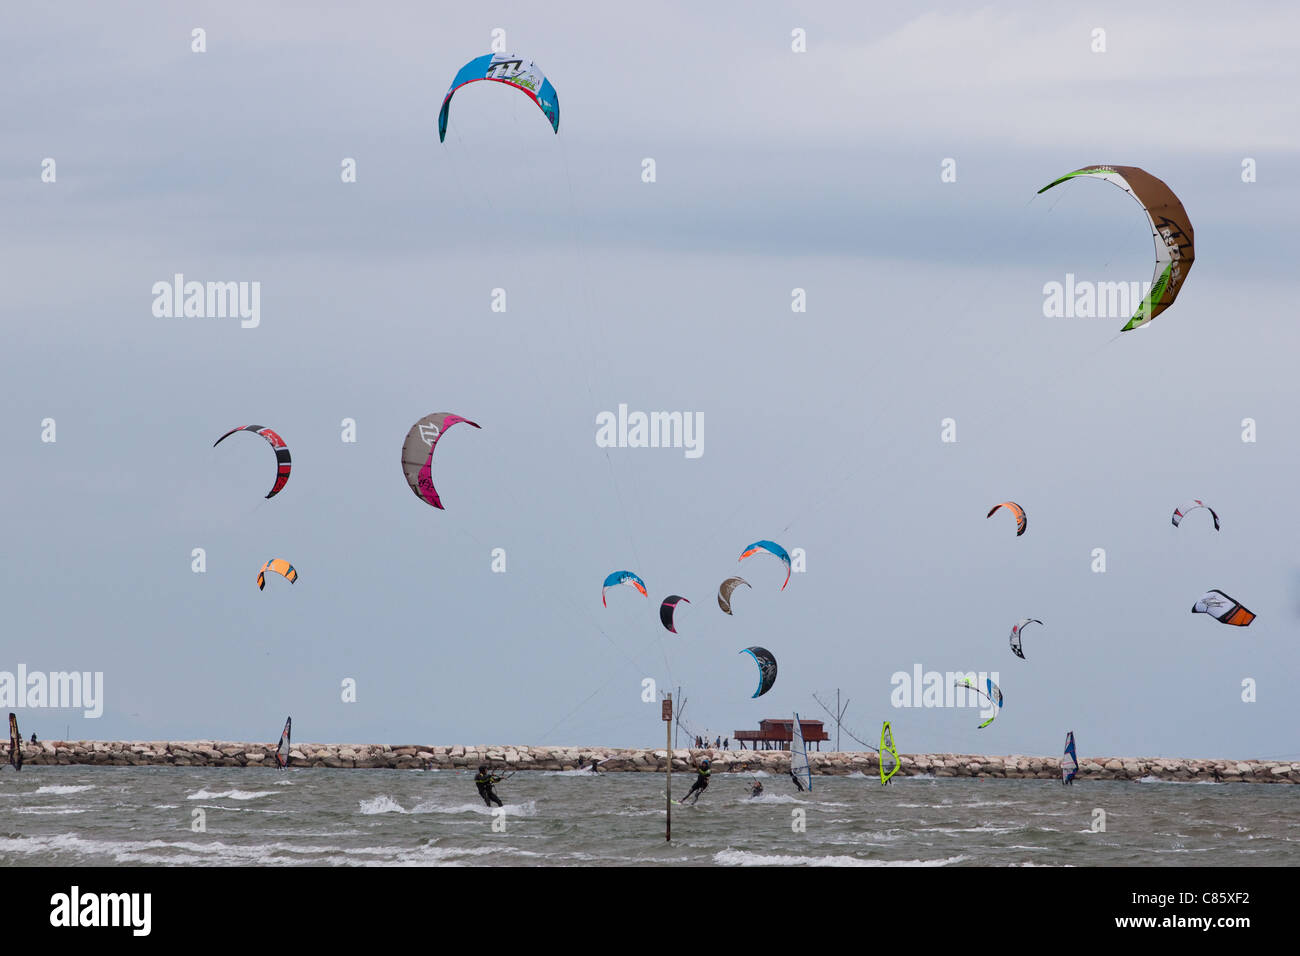 Kitesurfs in Sottomarina during a windy day Stock Photo